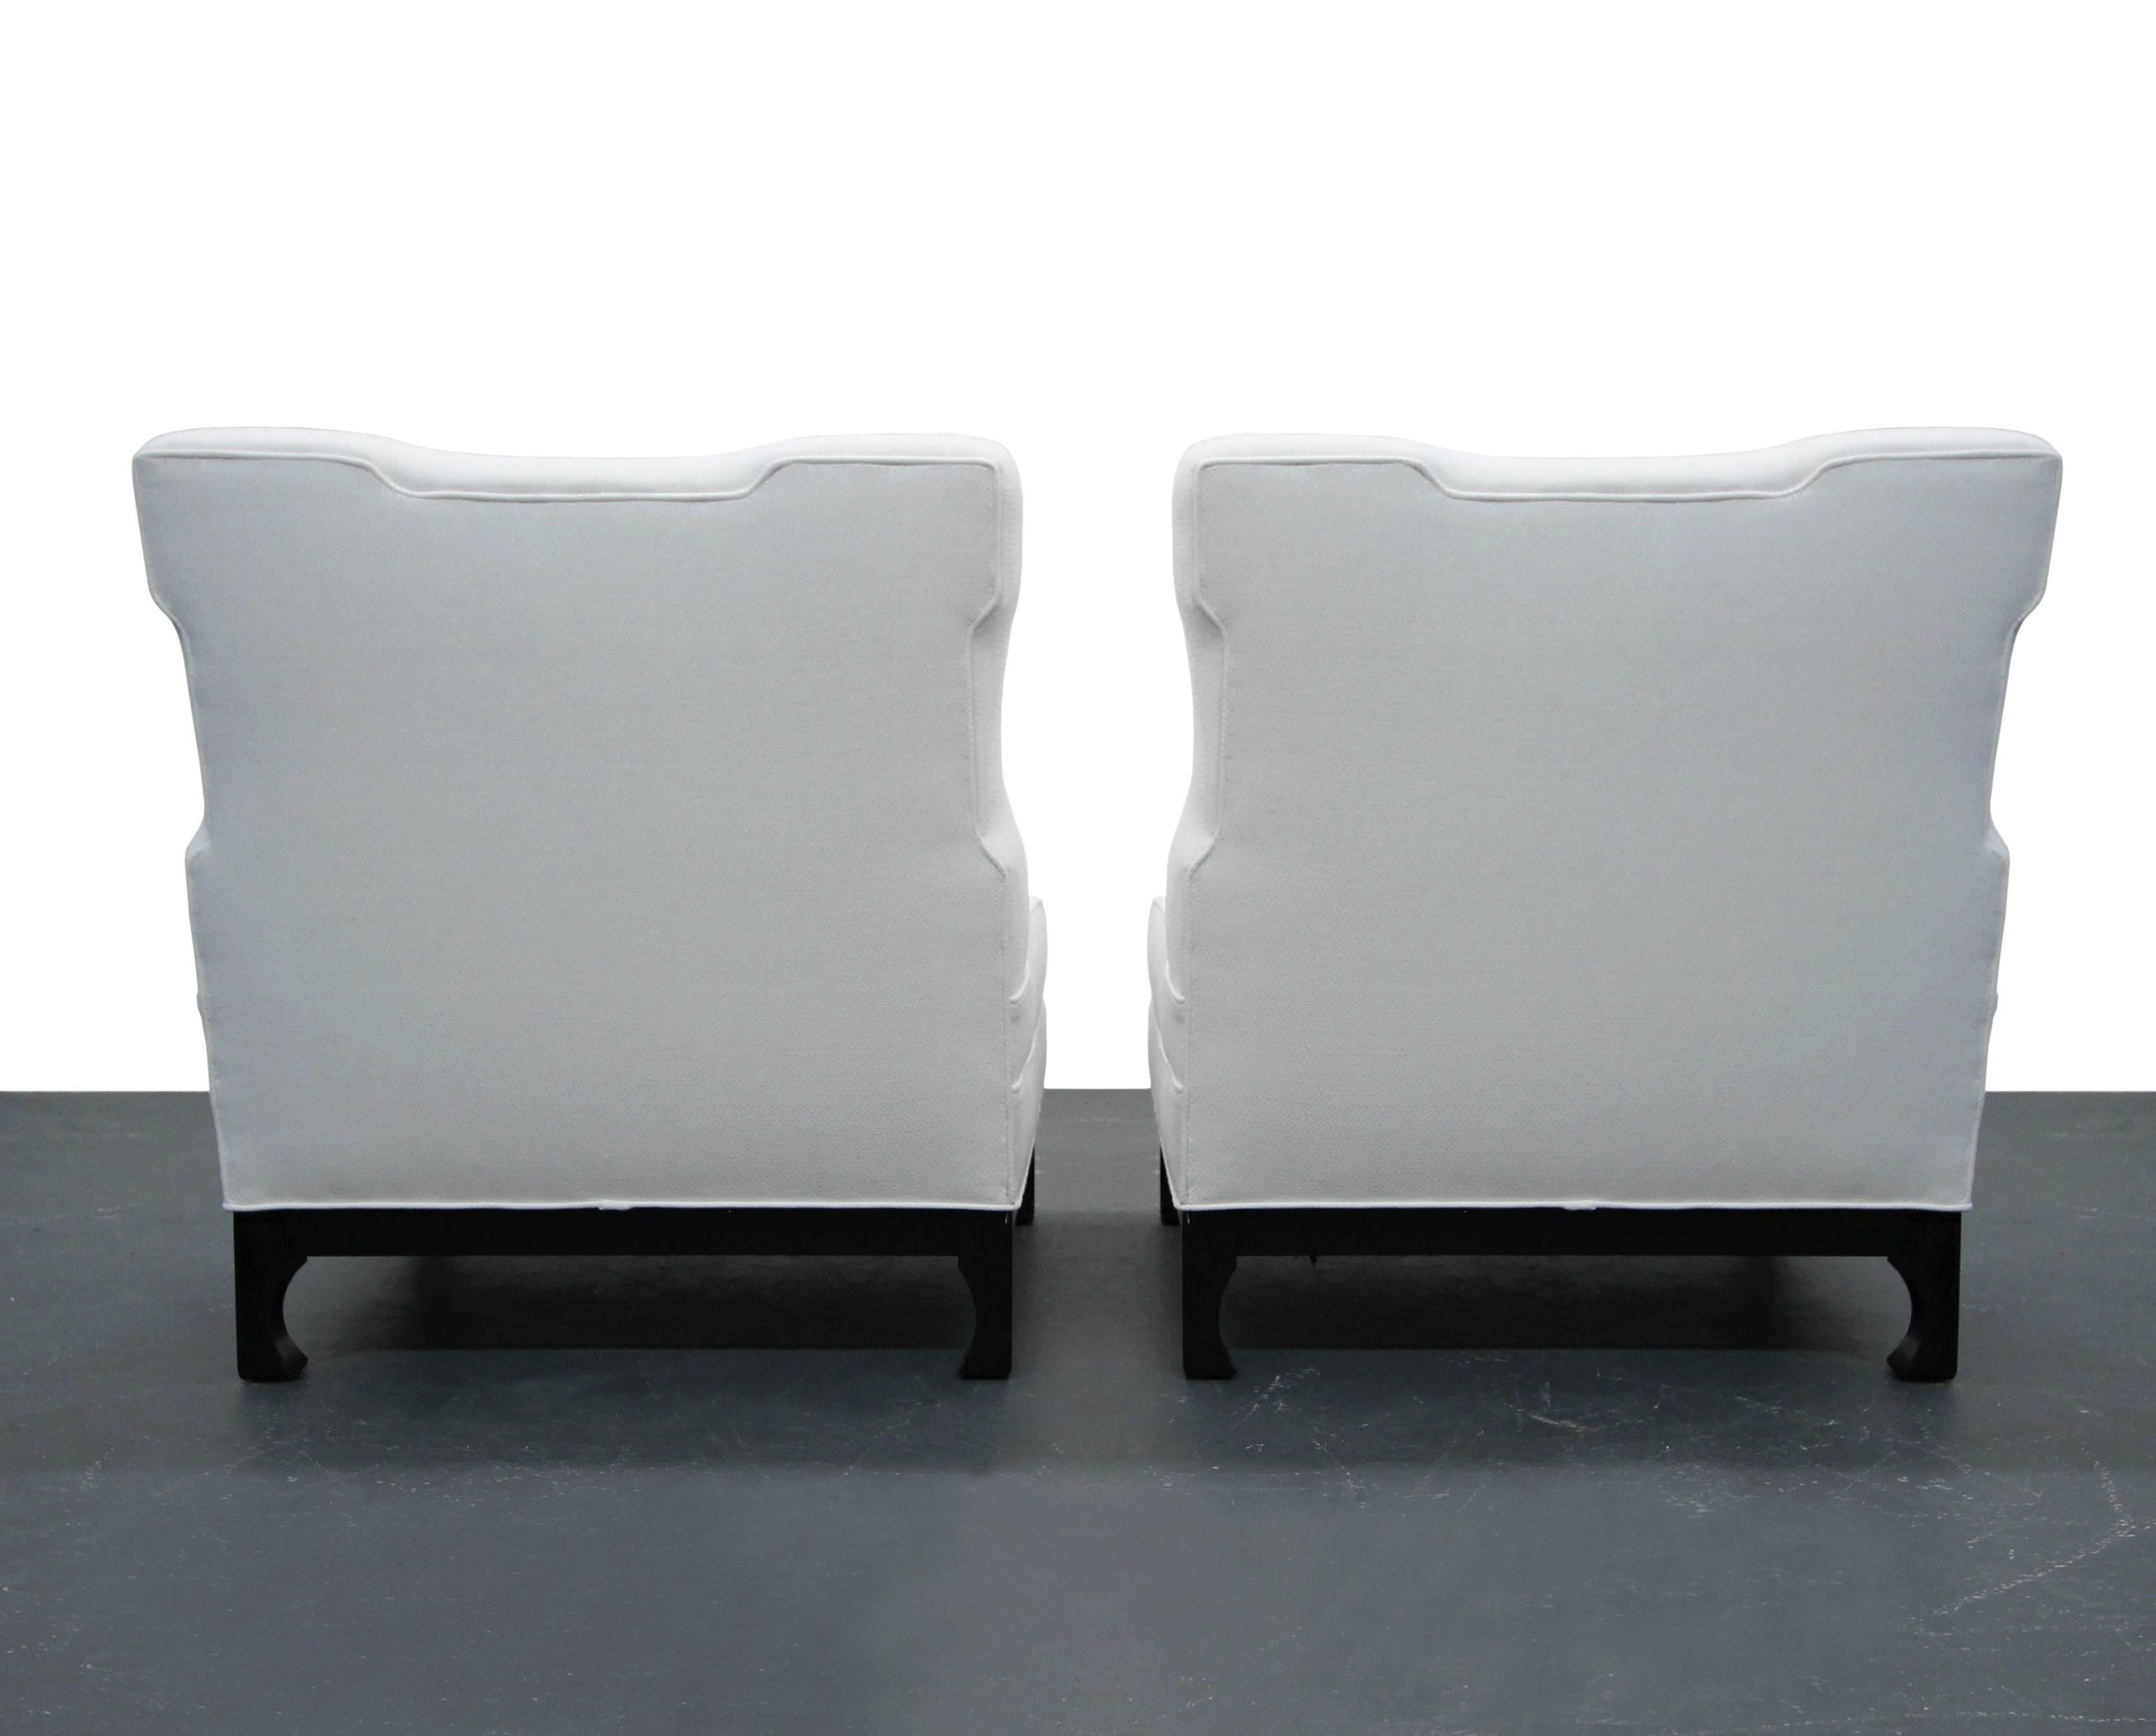 20th Century Large Pair of Mid-Century Modern Asian Style Slipper Chairs by James Mont